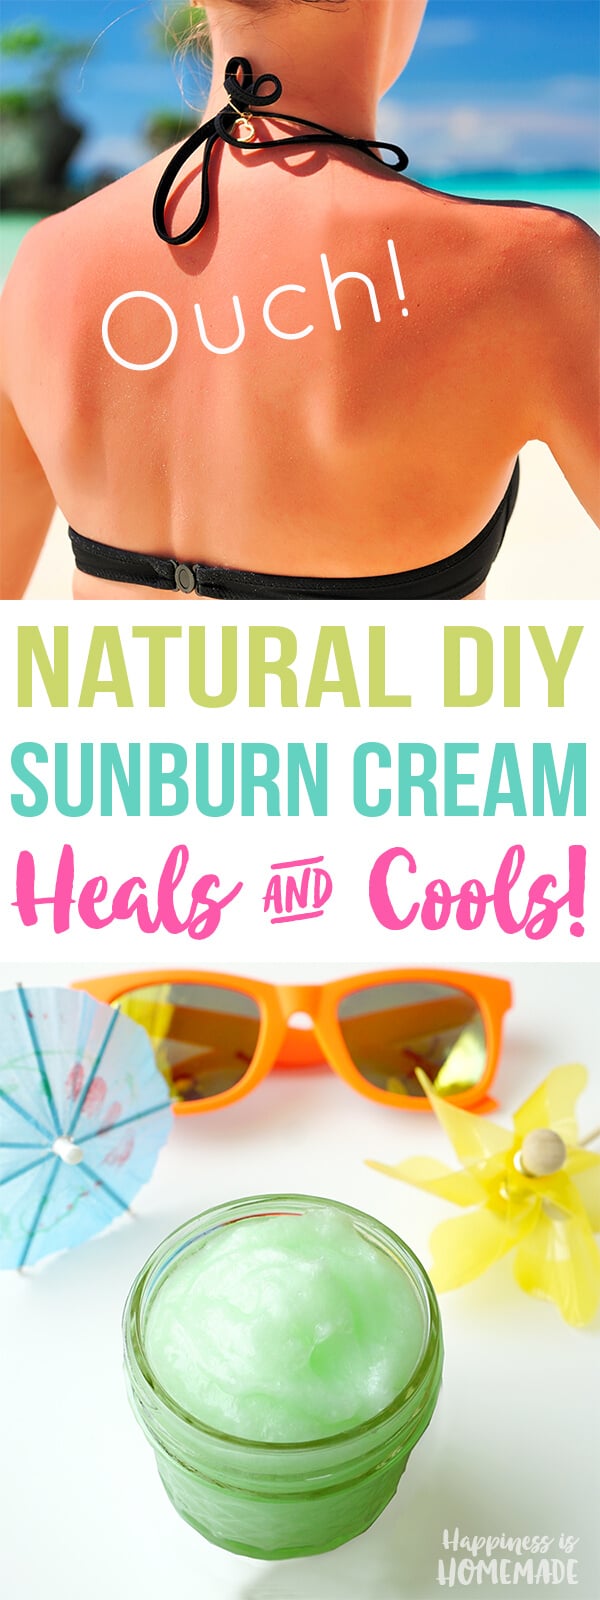 Natural DIY Homemade Healing and Cooling Sunburn Cream with Lavender Peppermint Coconut Oil and Aloe Vera